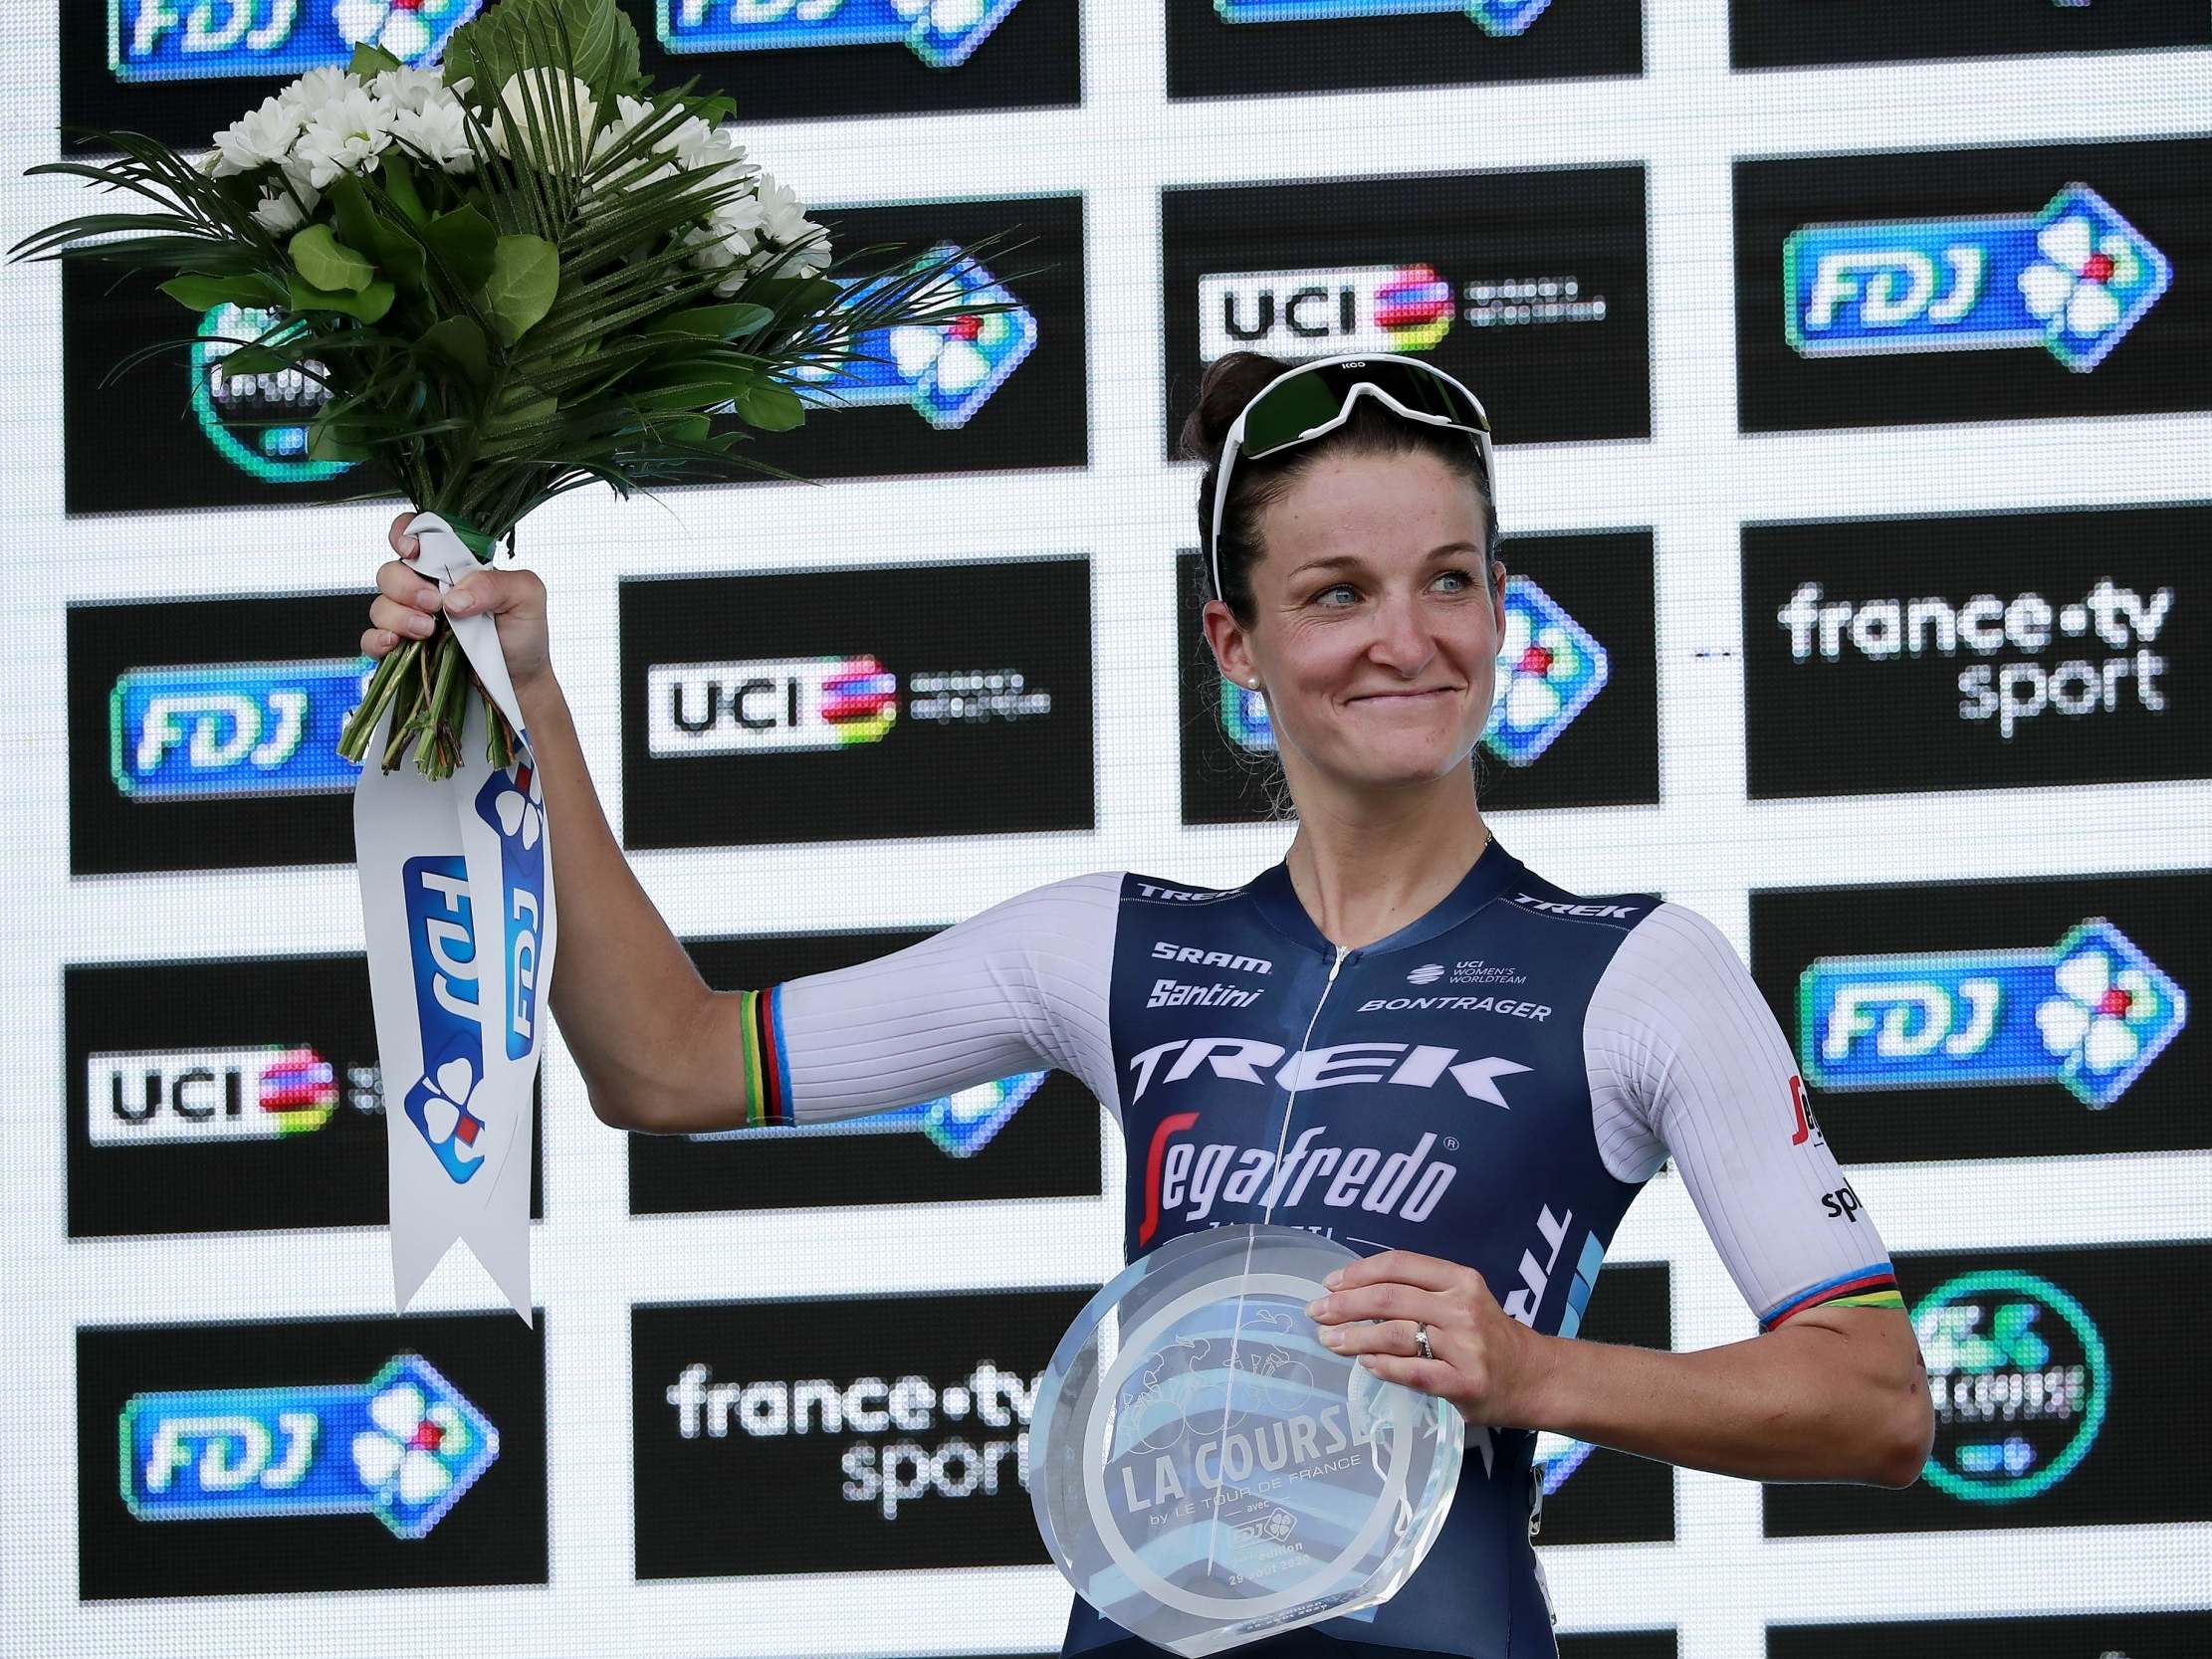 Deignan labelled the winning feeling 'phenomenal' with he first La Course victory